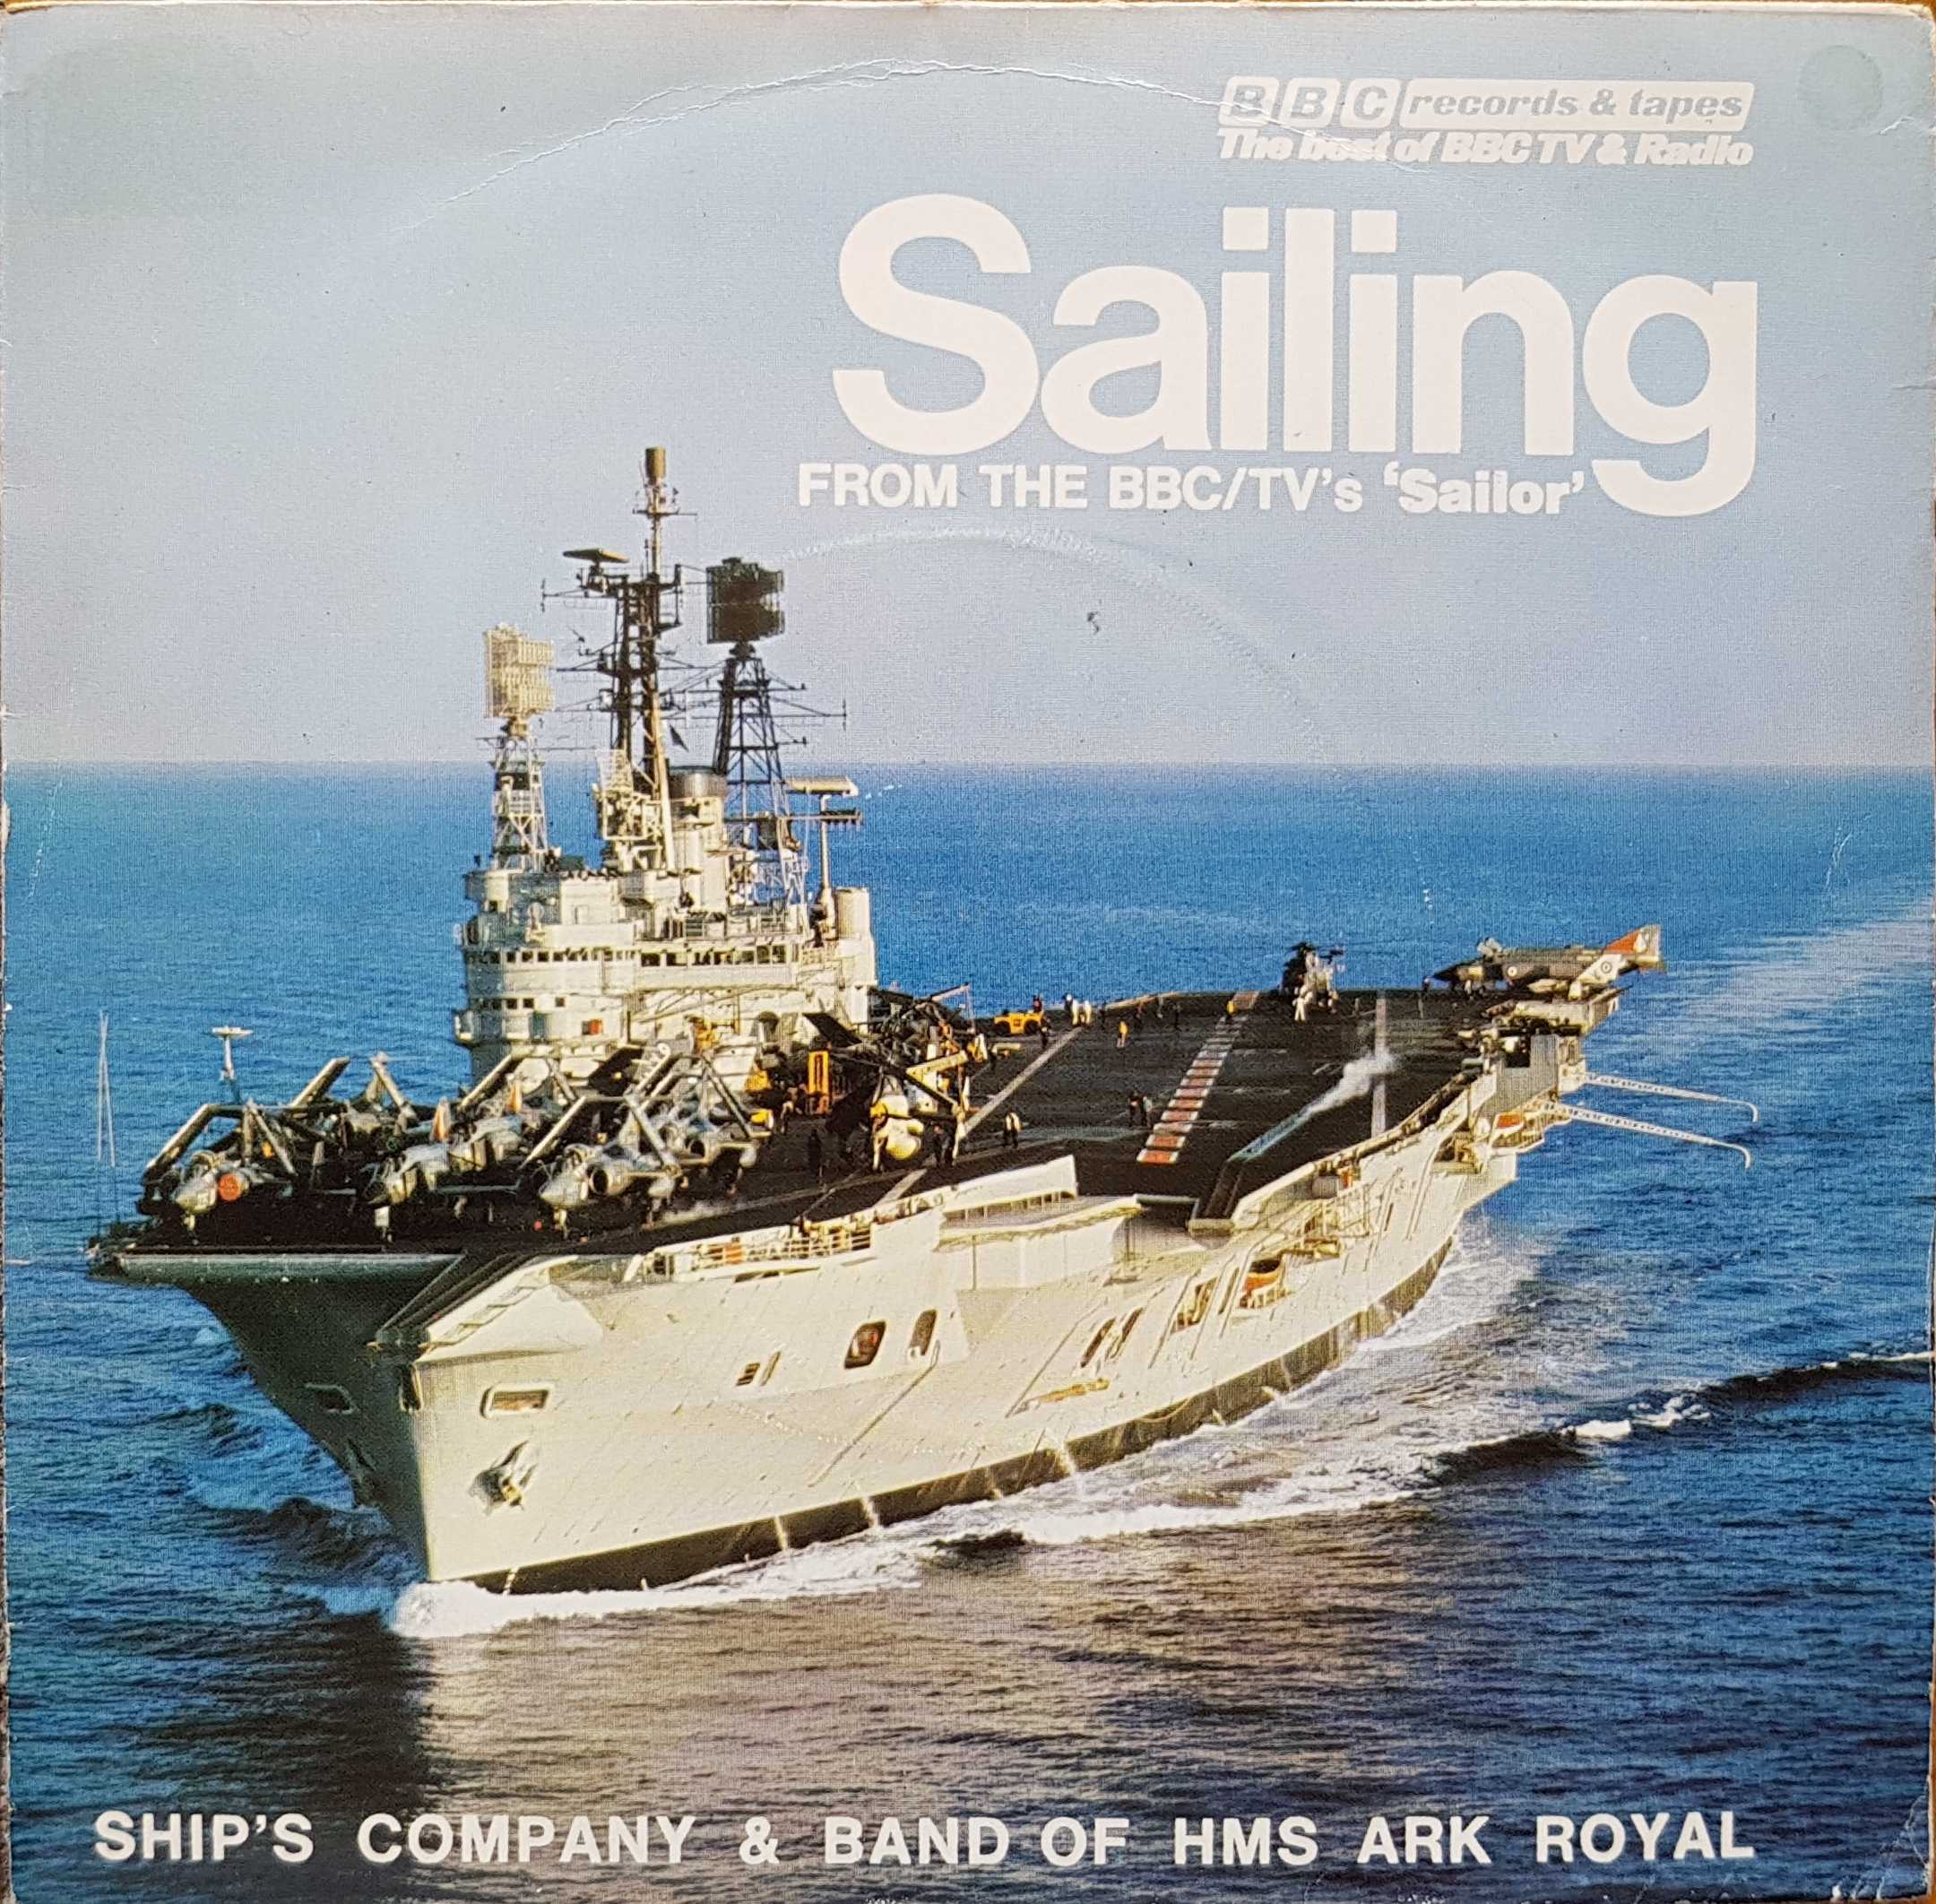 Picture of RESL 38 Sailing by artist Sutherland / Mike Batt from the BBC singles - Records and Tapes library